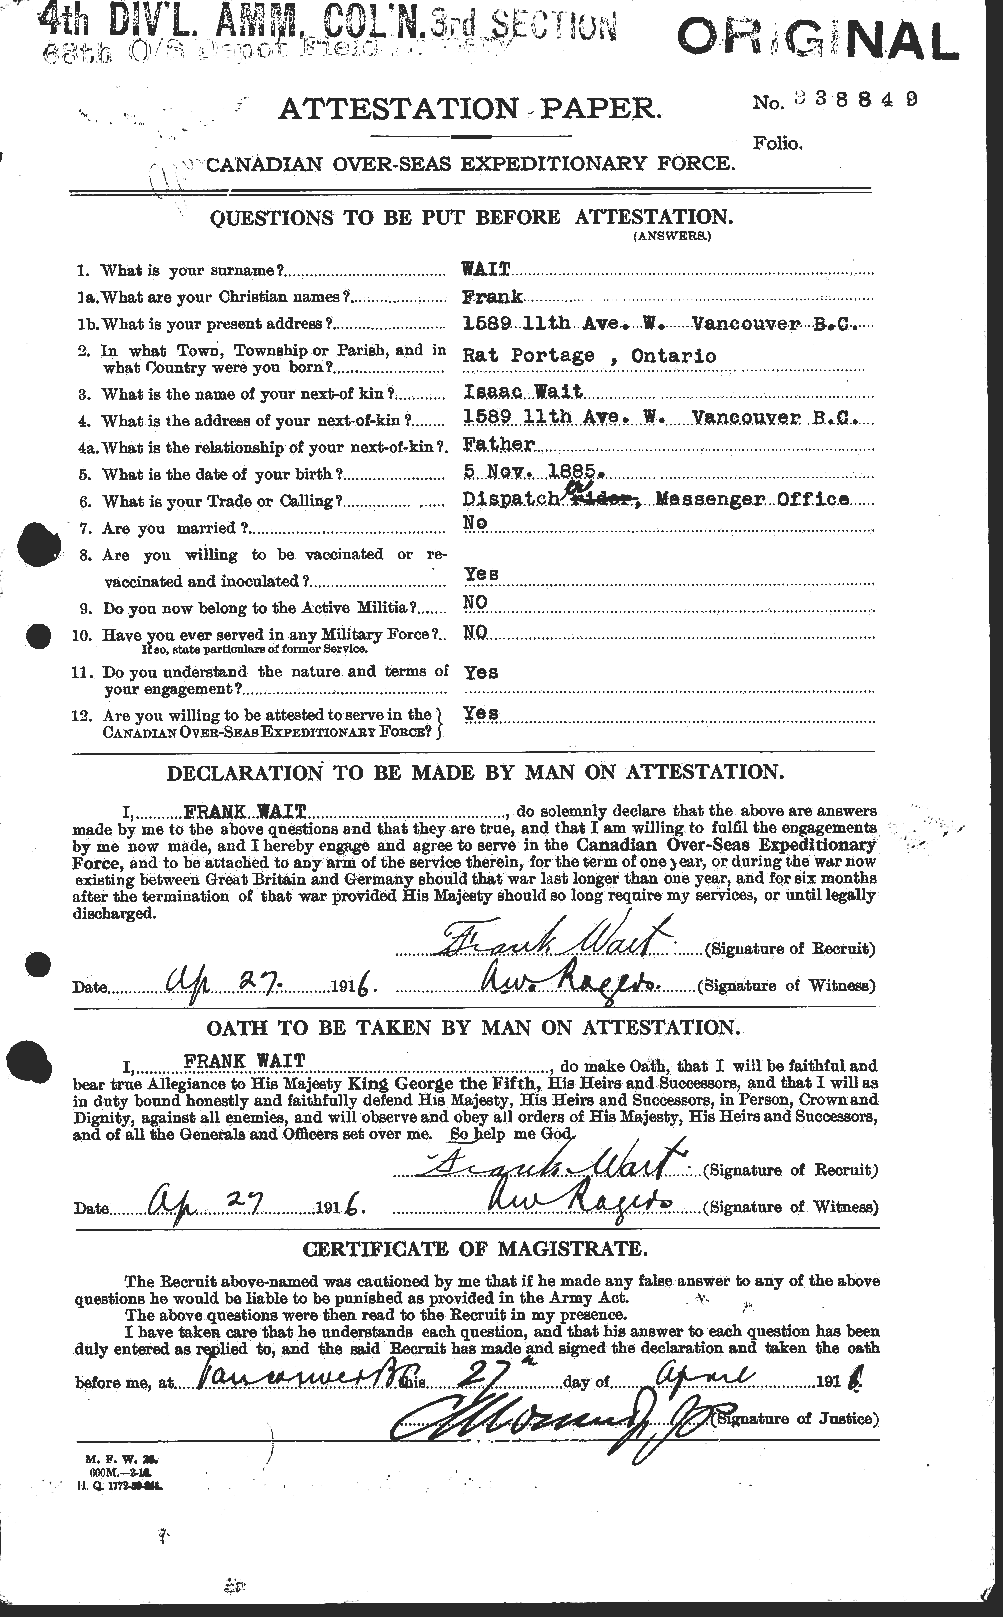 Personnel Records of the First World War - CEF 654211a